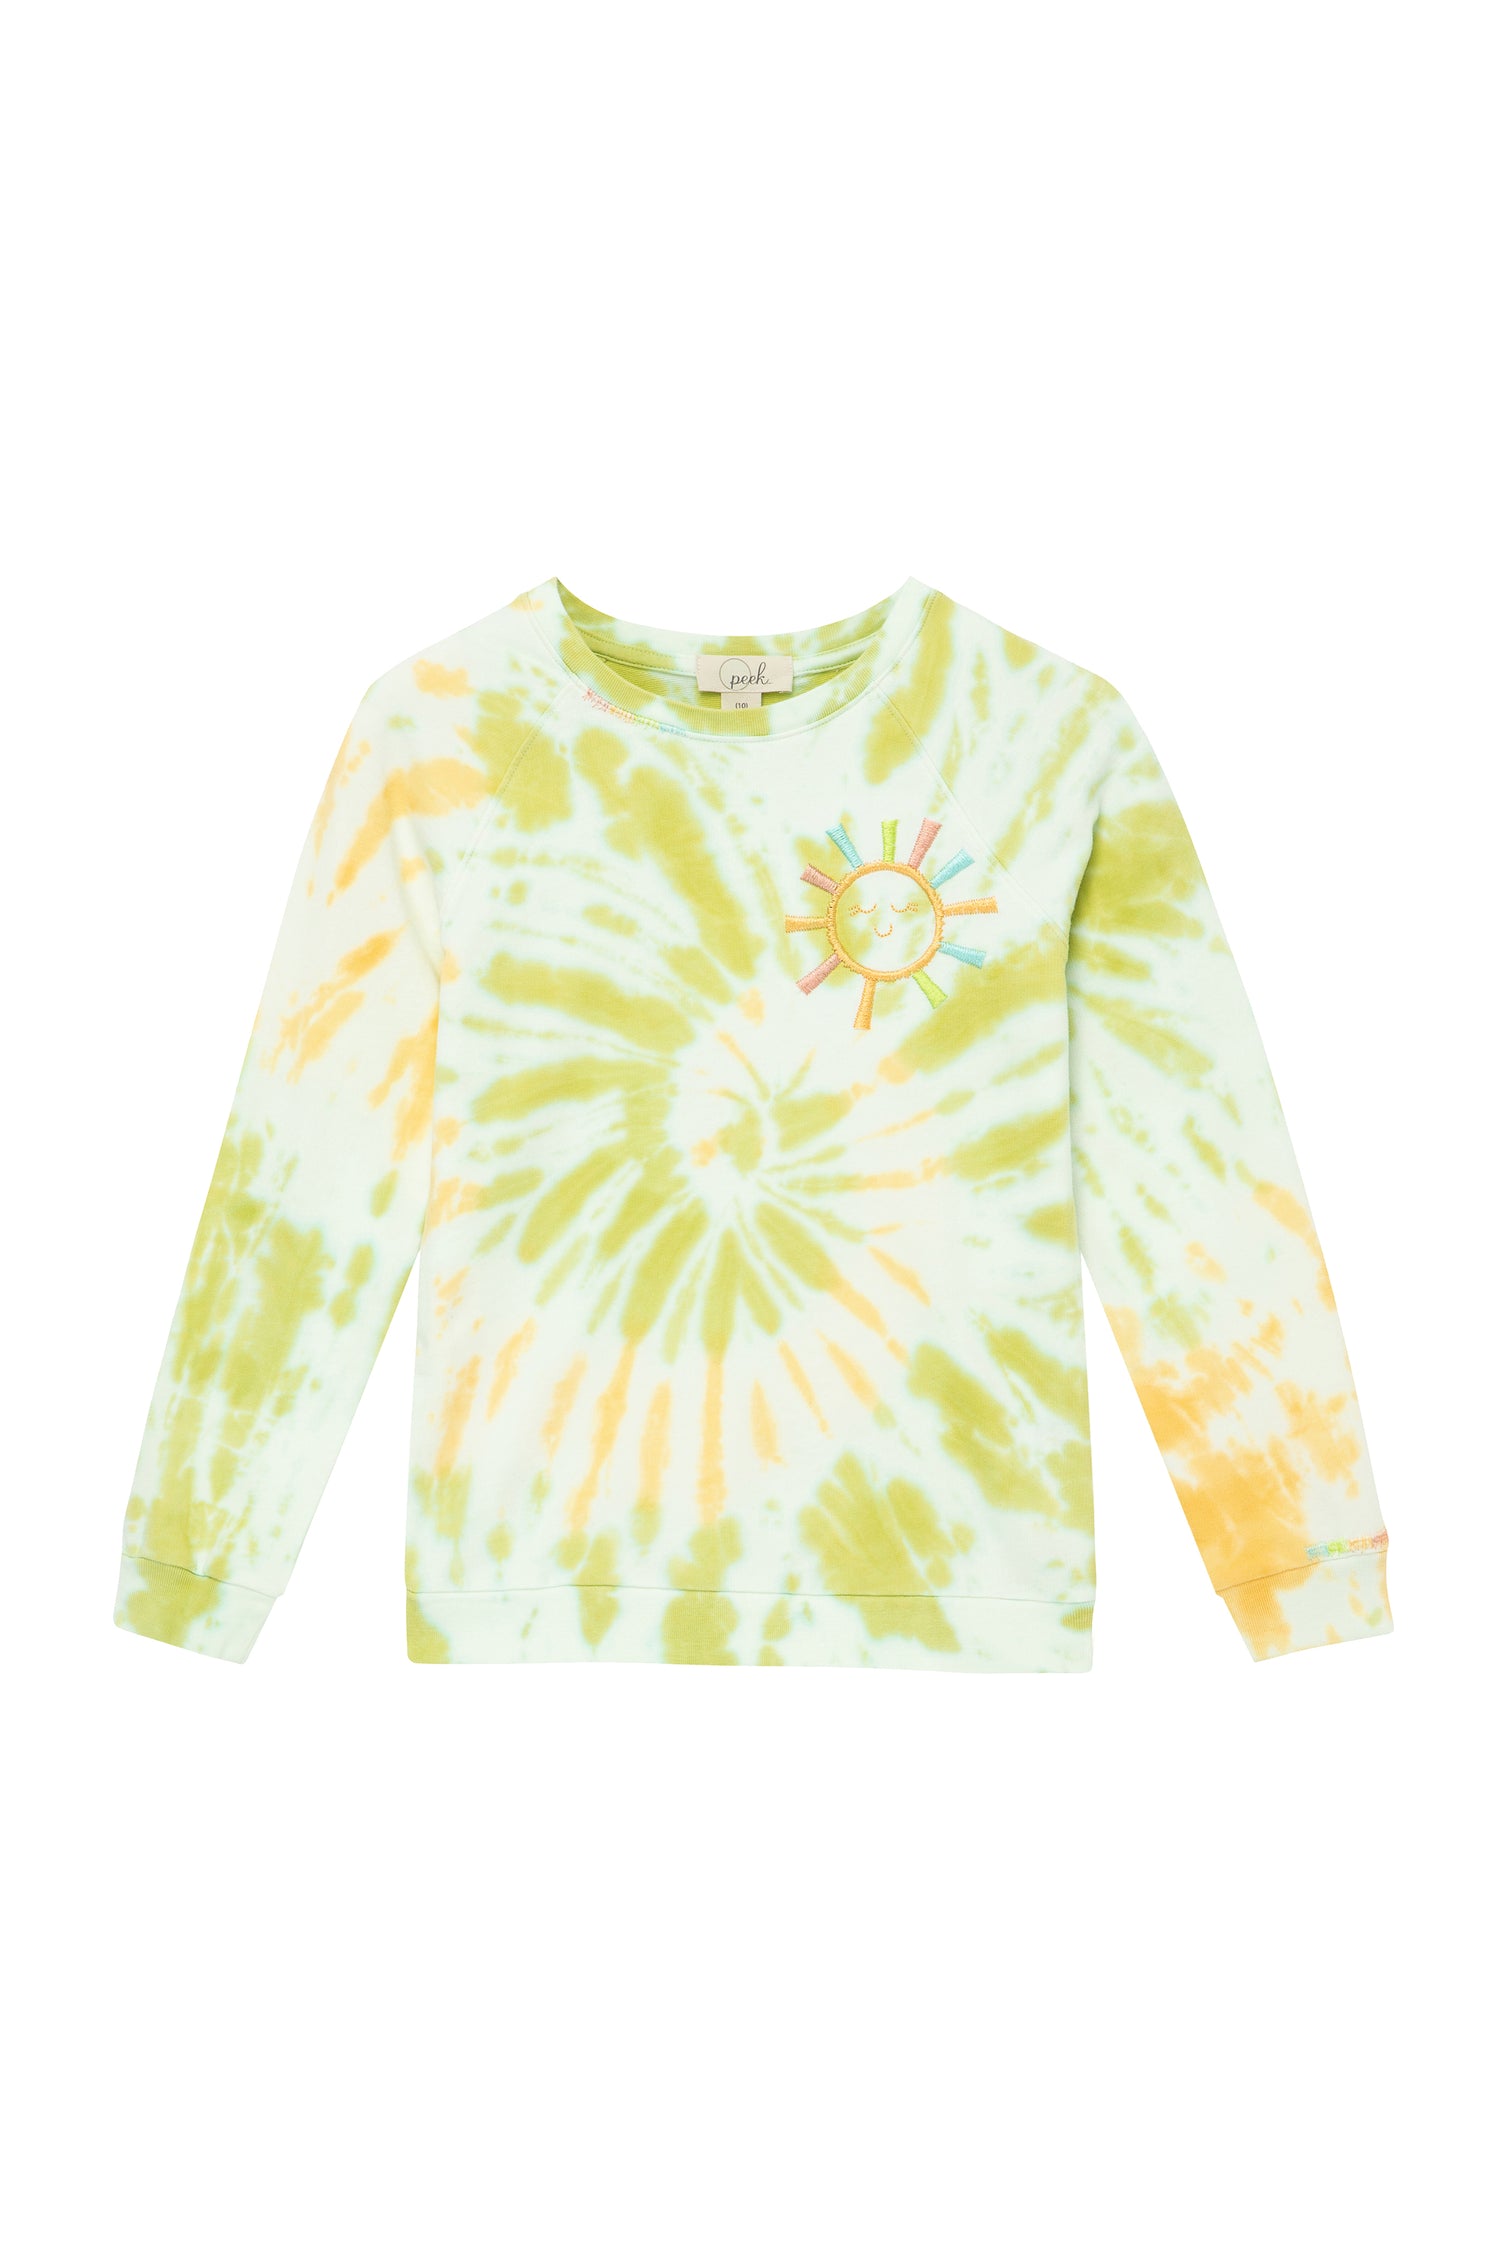 Front view of yellow and green tie dye sweatshirt 